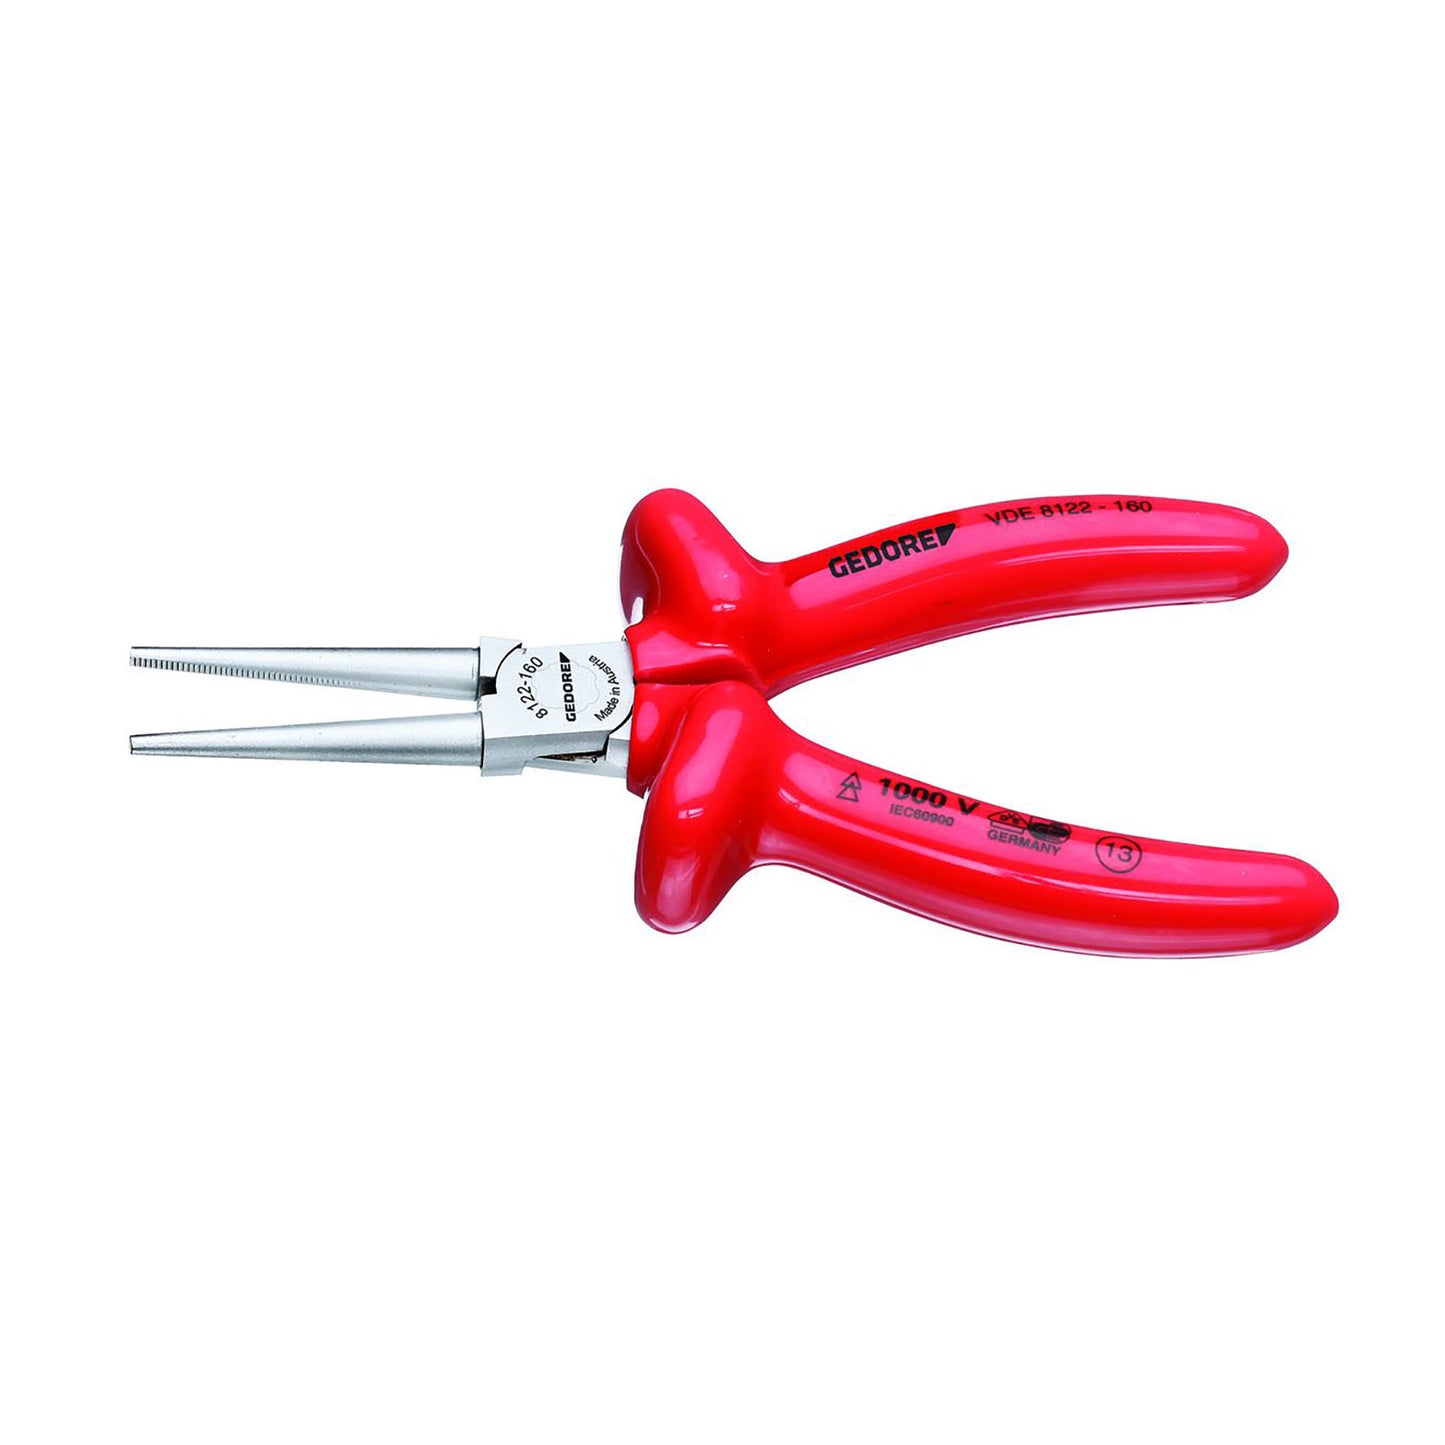 GEDORE VDE 8122-160 - VDE round mouth pliers 160 (6717110)